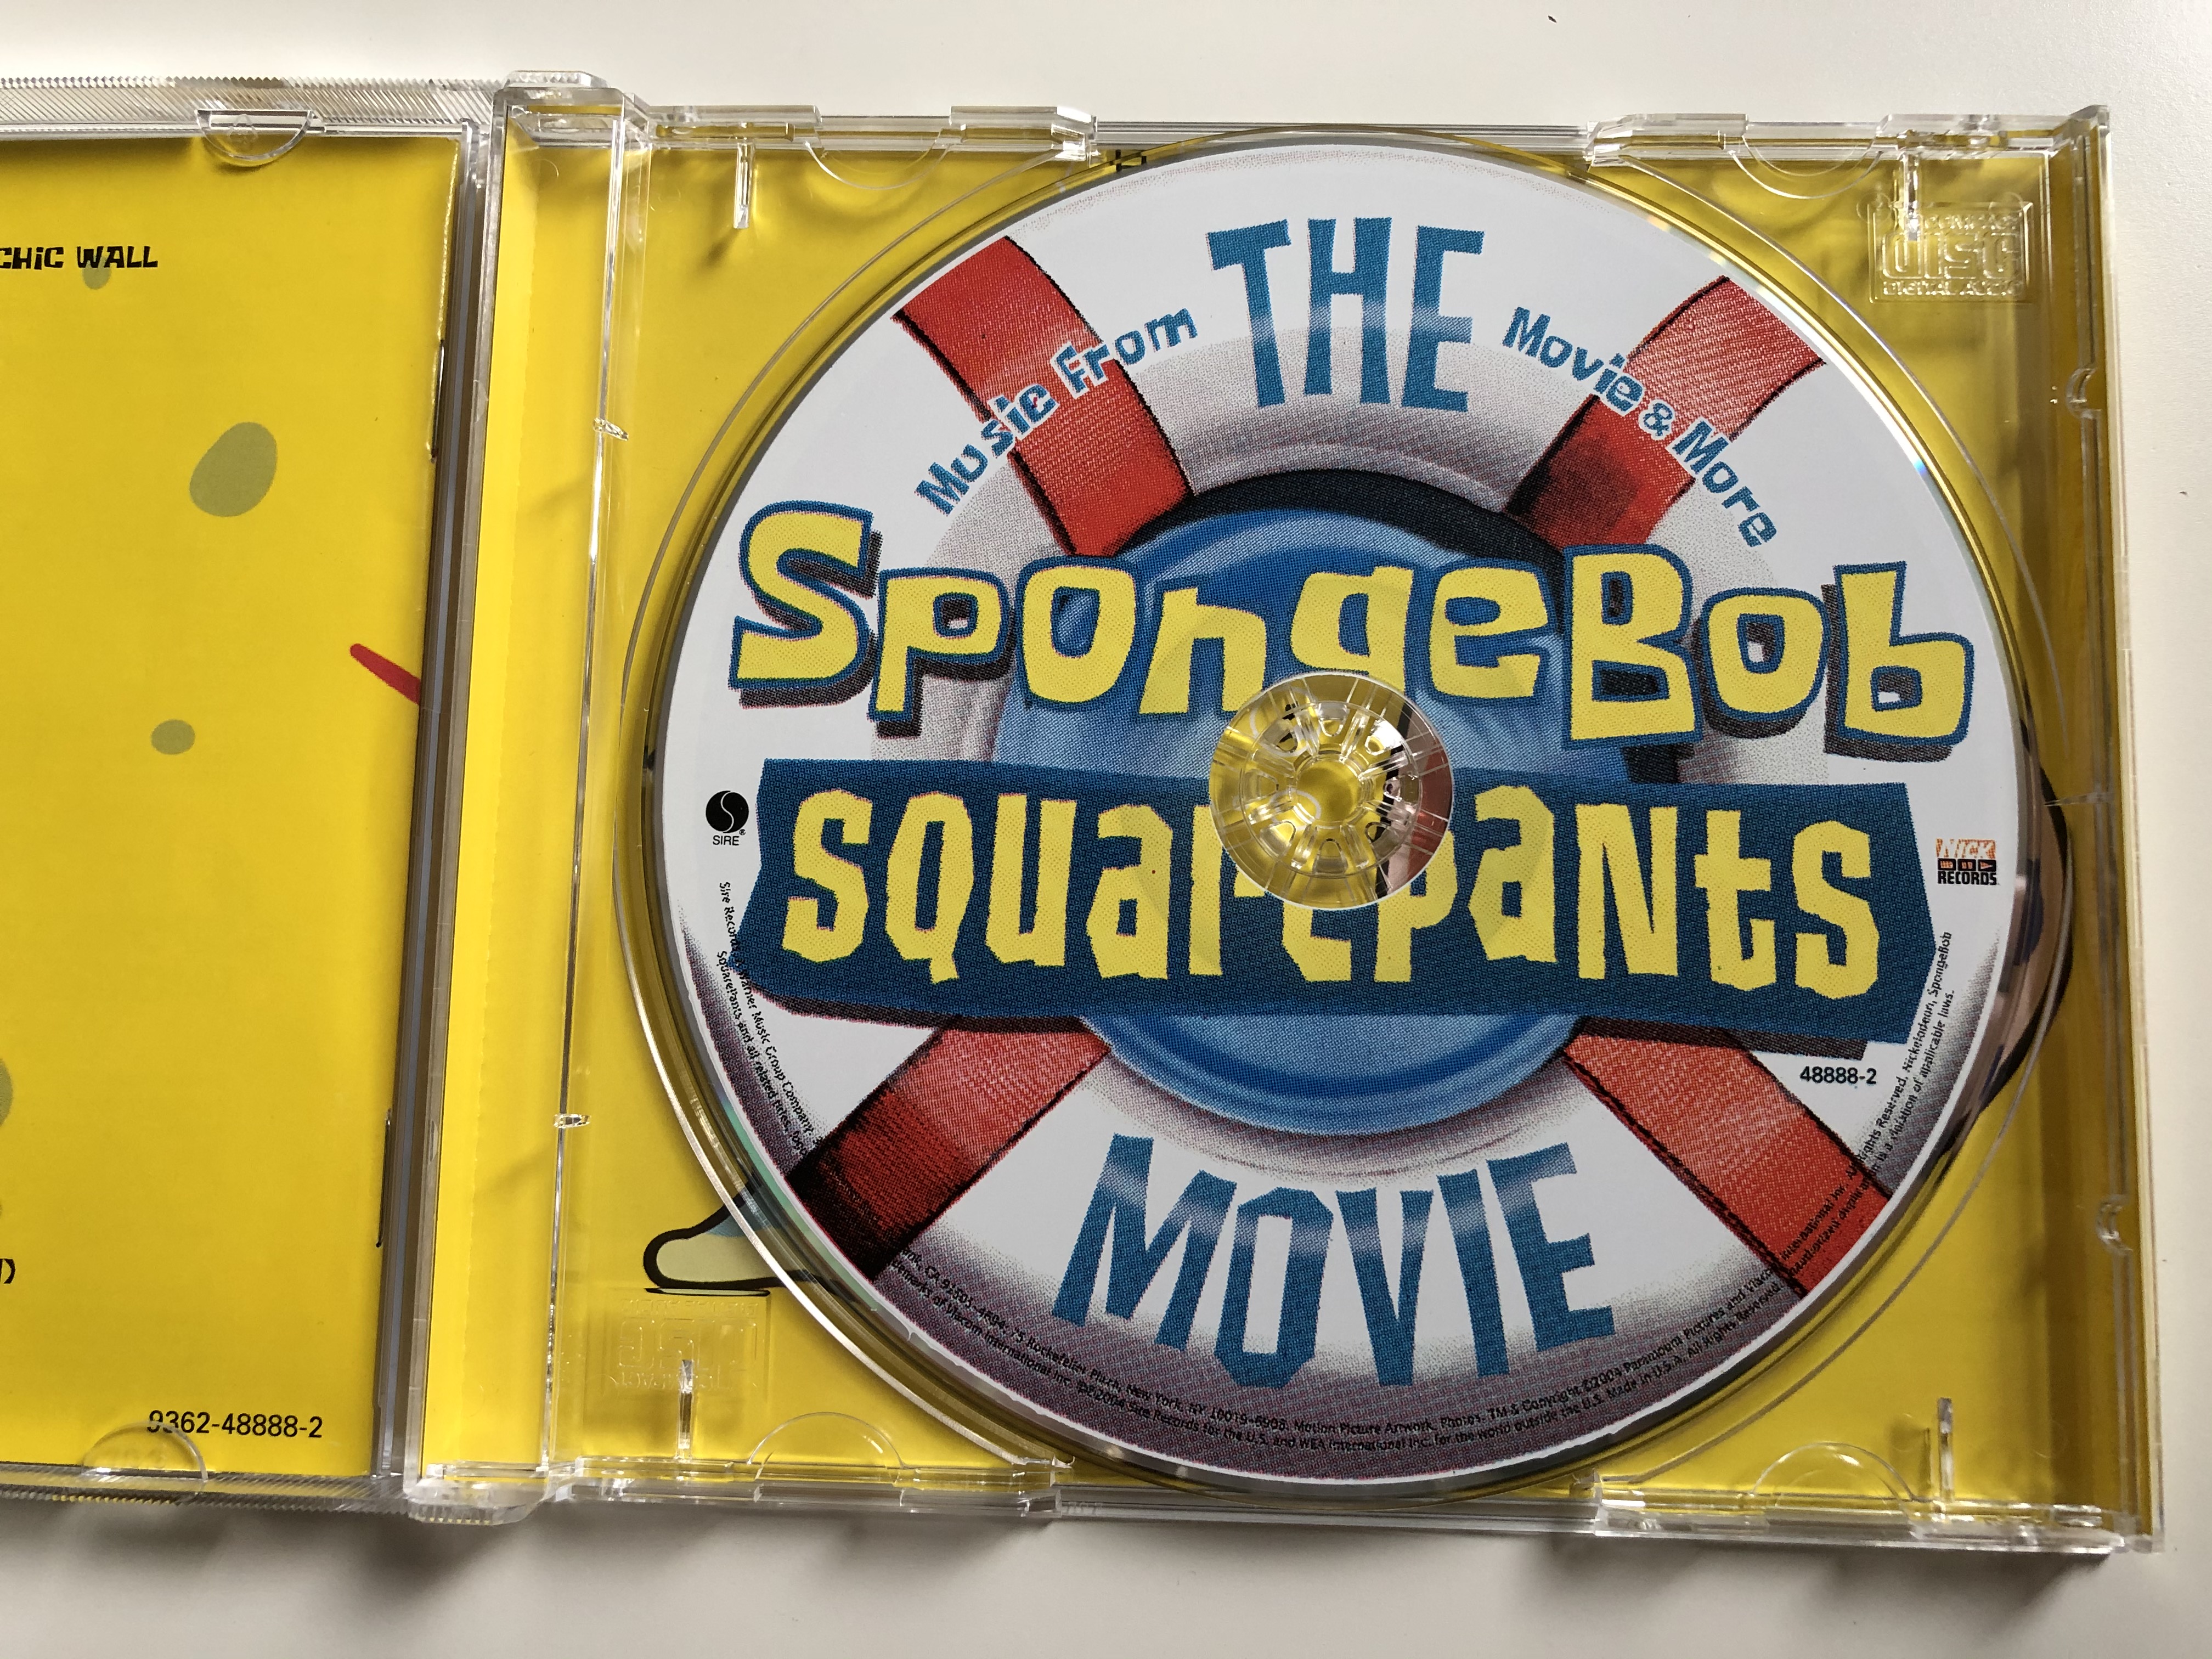 the-spongebob-squarepants-movie-music-from-the-movie-and-more...-sire-audio-cd-2004-9362-48888-2-3-.jpg